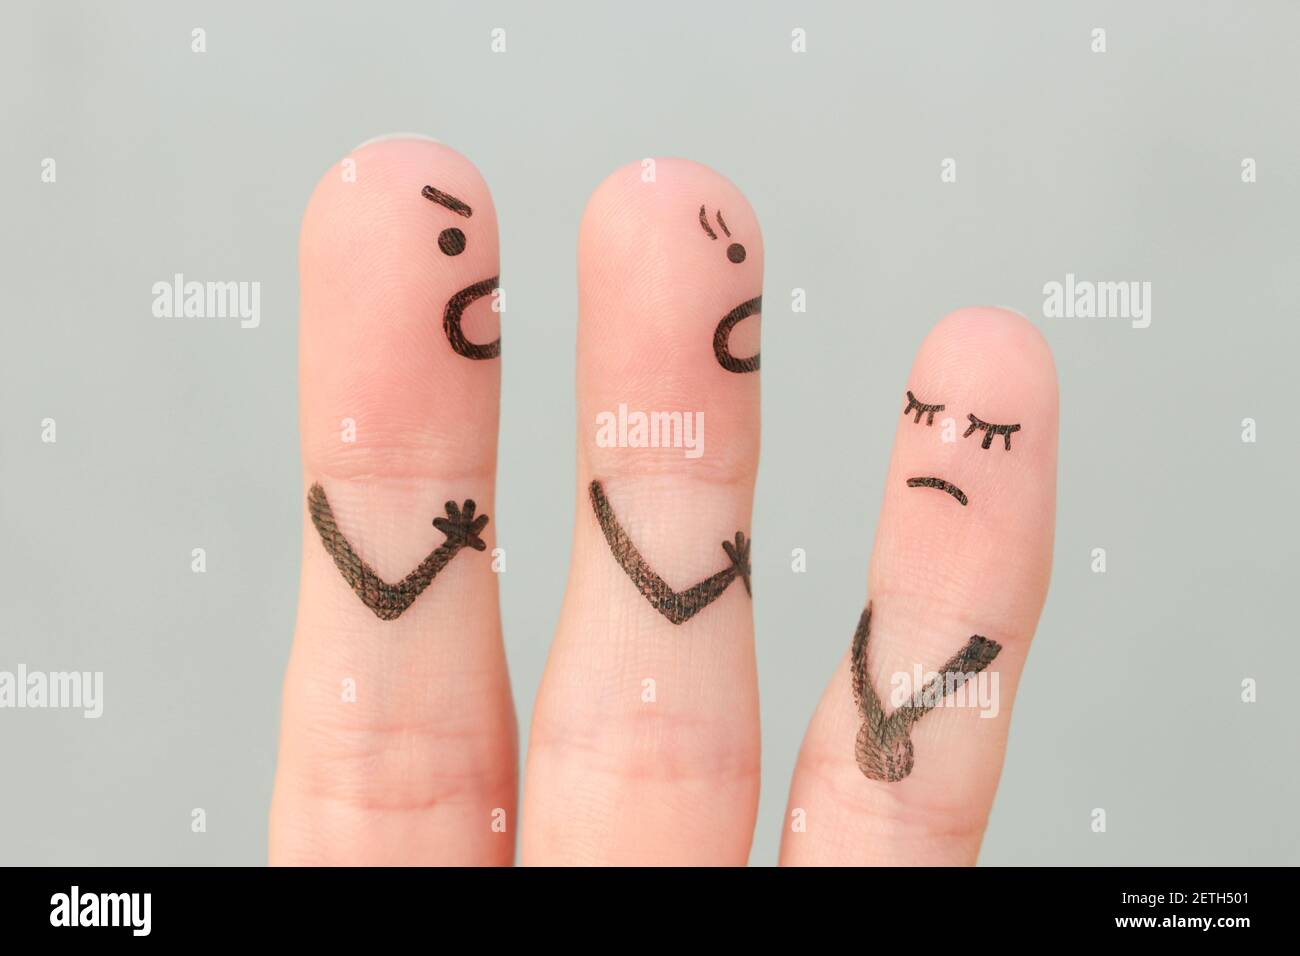 Fingers art of family during quarrel. Concept of parents scold naughty child. Stock Photo